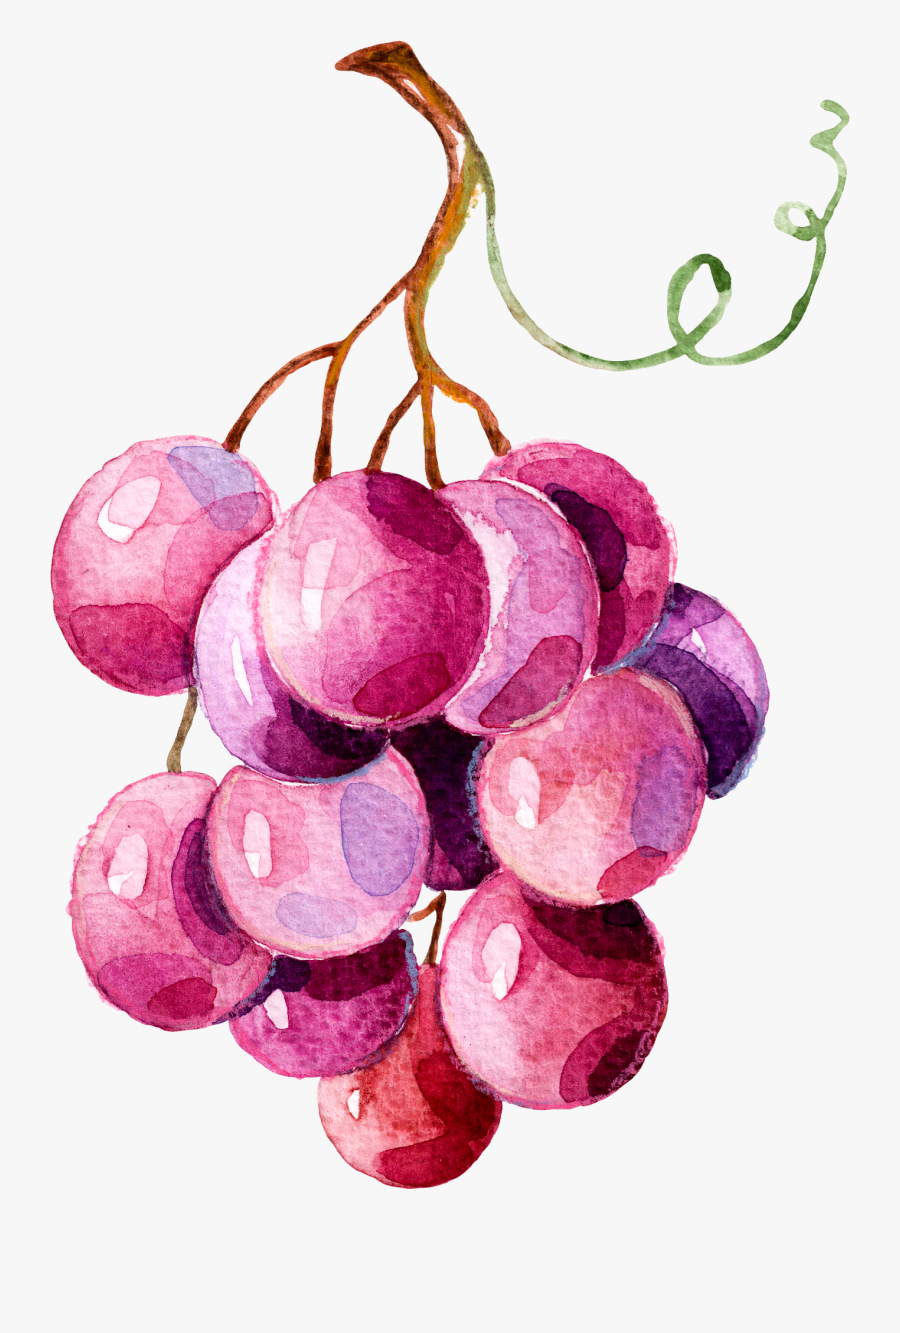 Grapes Watercolor Painting Png, Transparent Clipart